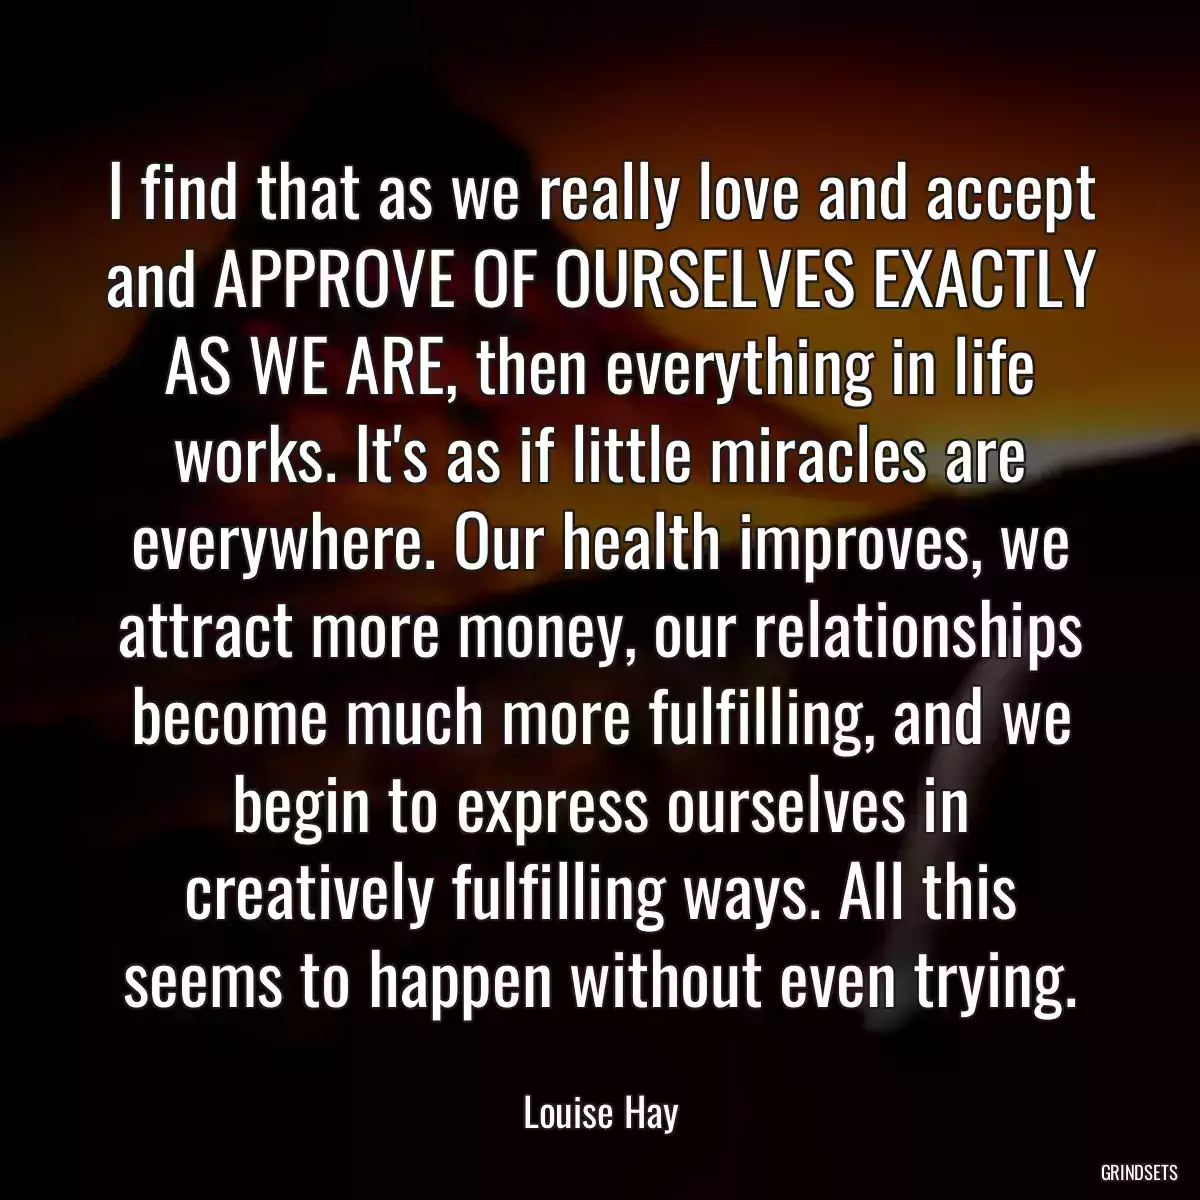 I find that as we really love and accept and APPROVE OF OURSELVES EXACTLY AS WE ARE, then everything in life works. It\'s as if little miracles are everywhere. Our health improves, we attract more money, our relationships become much more fulfilling, and we begin to express ourselves in creatively fulfilling ways. All this seems to happen without even trying.